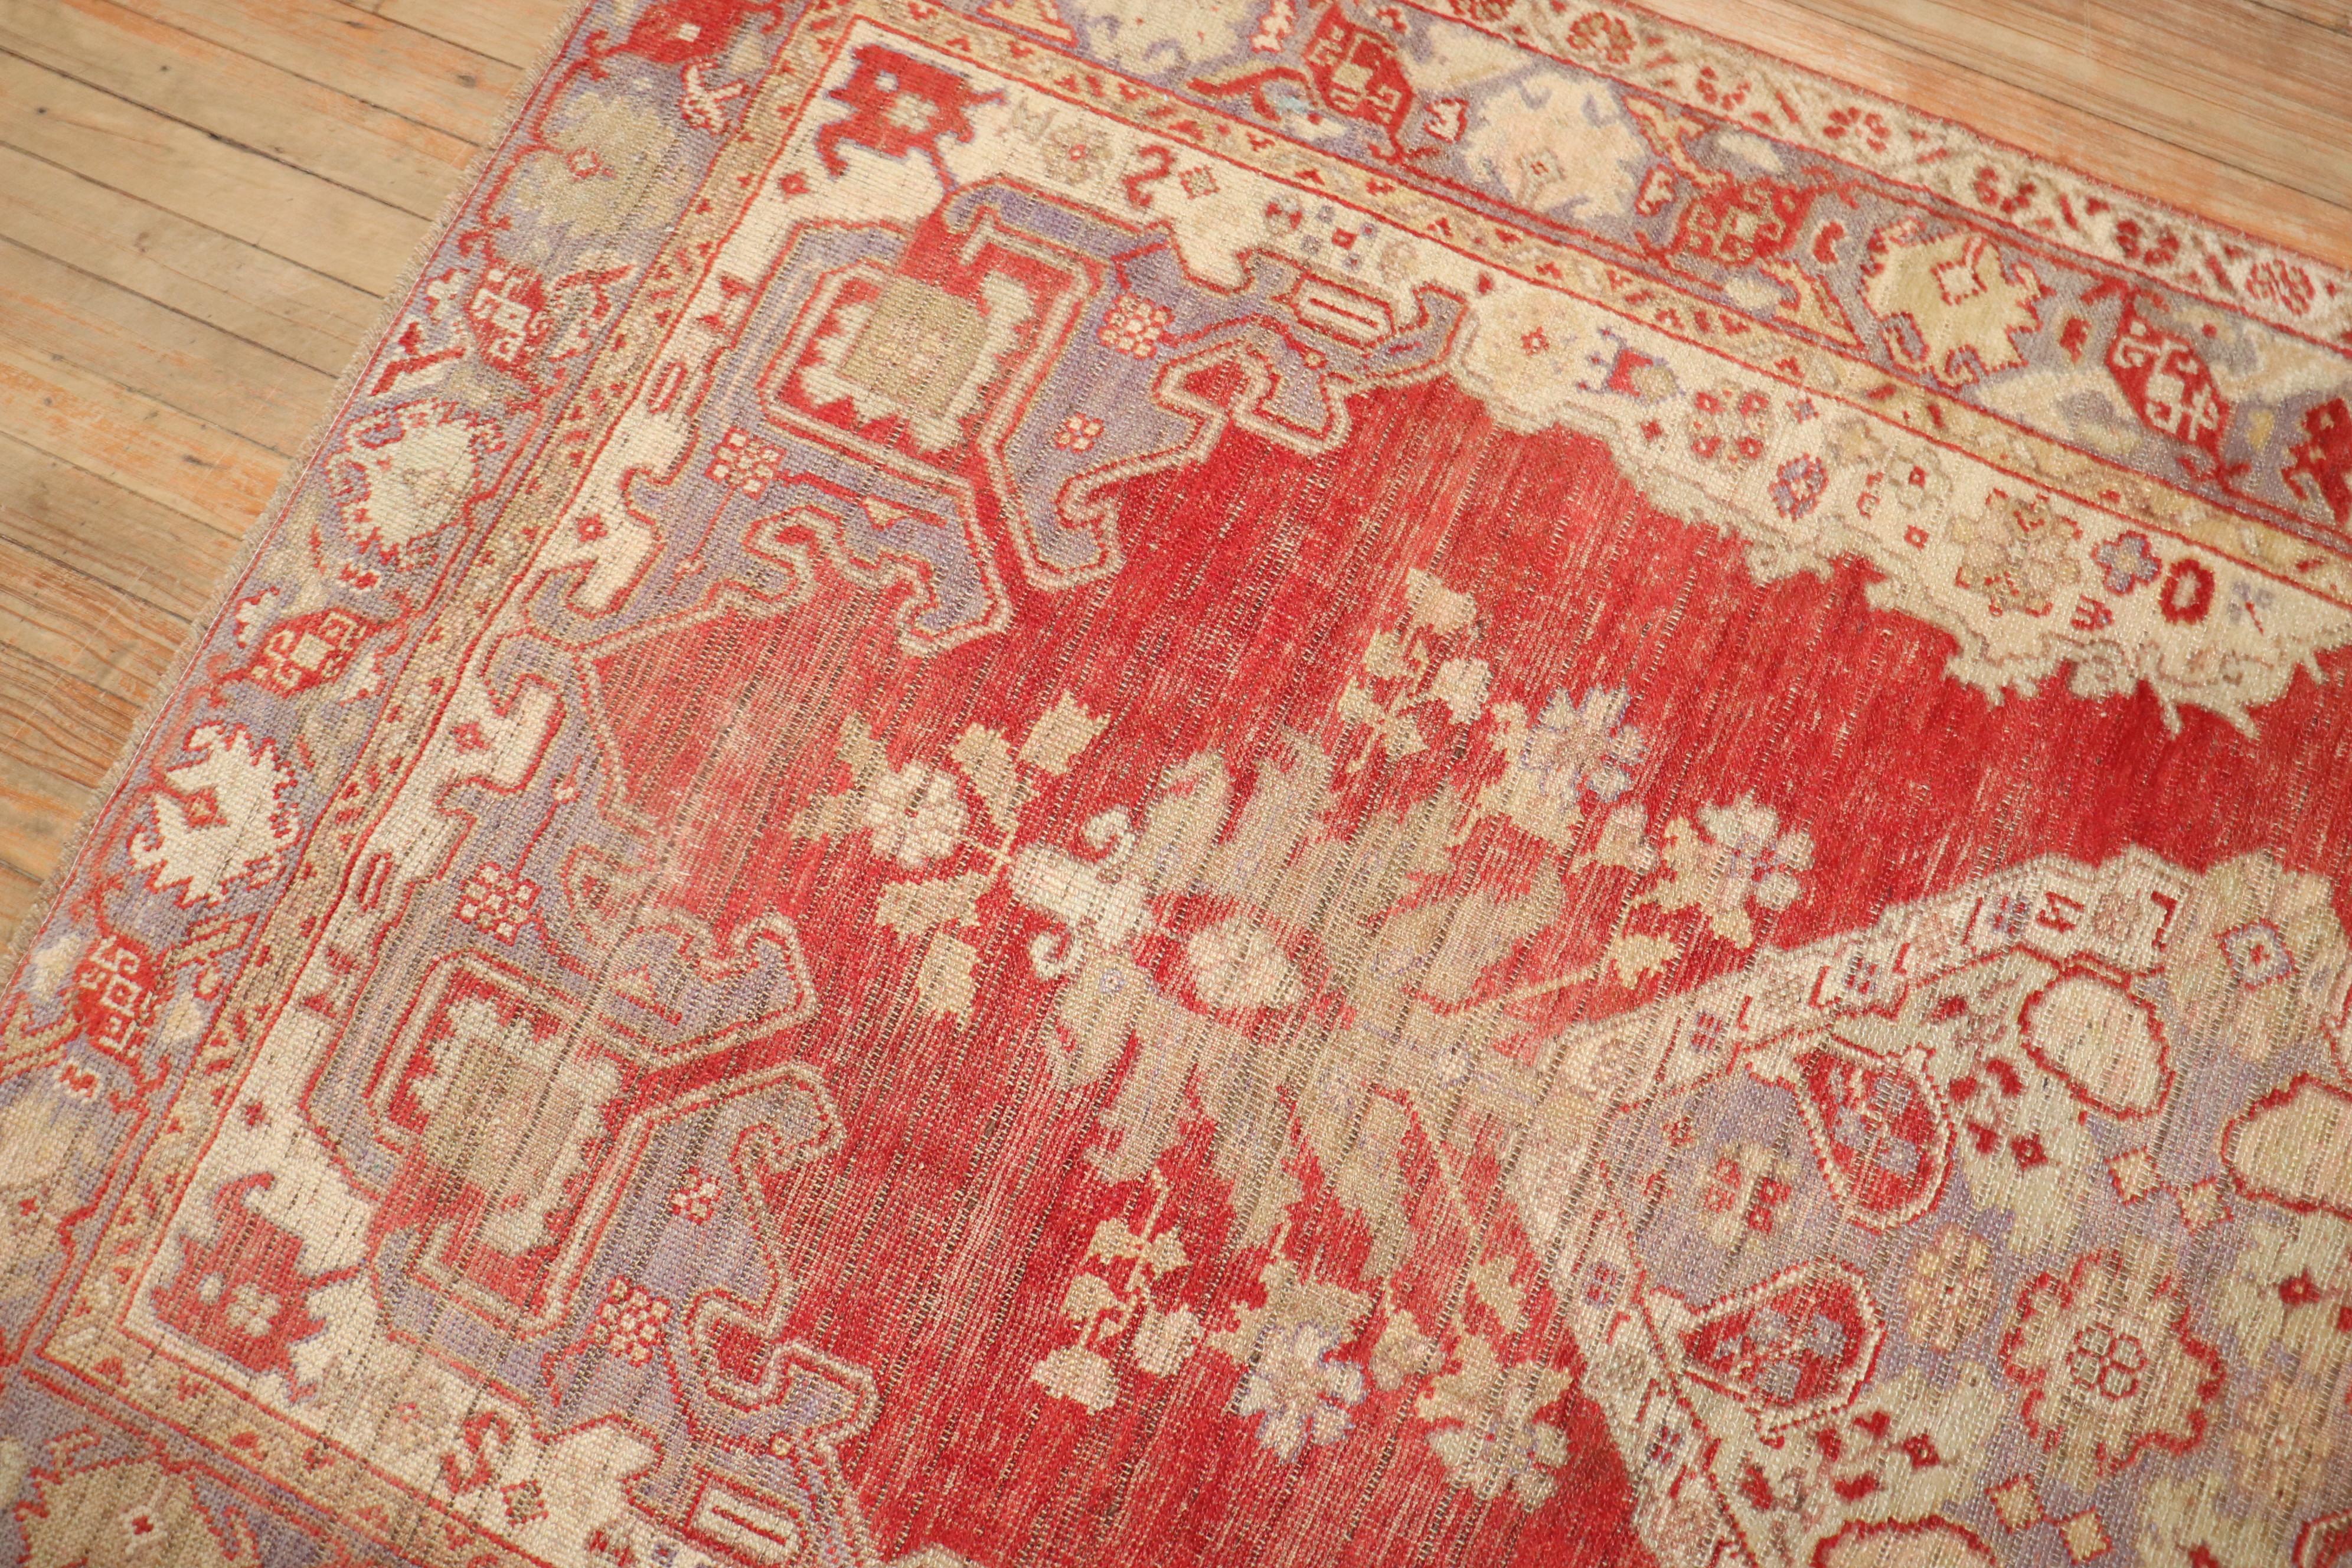 A vintage Turkish Kula carpet from the 2nd quarter of the 20th century in predominantly red,

Measures: 4'3'' x 7'4''.